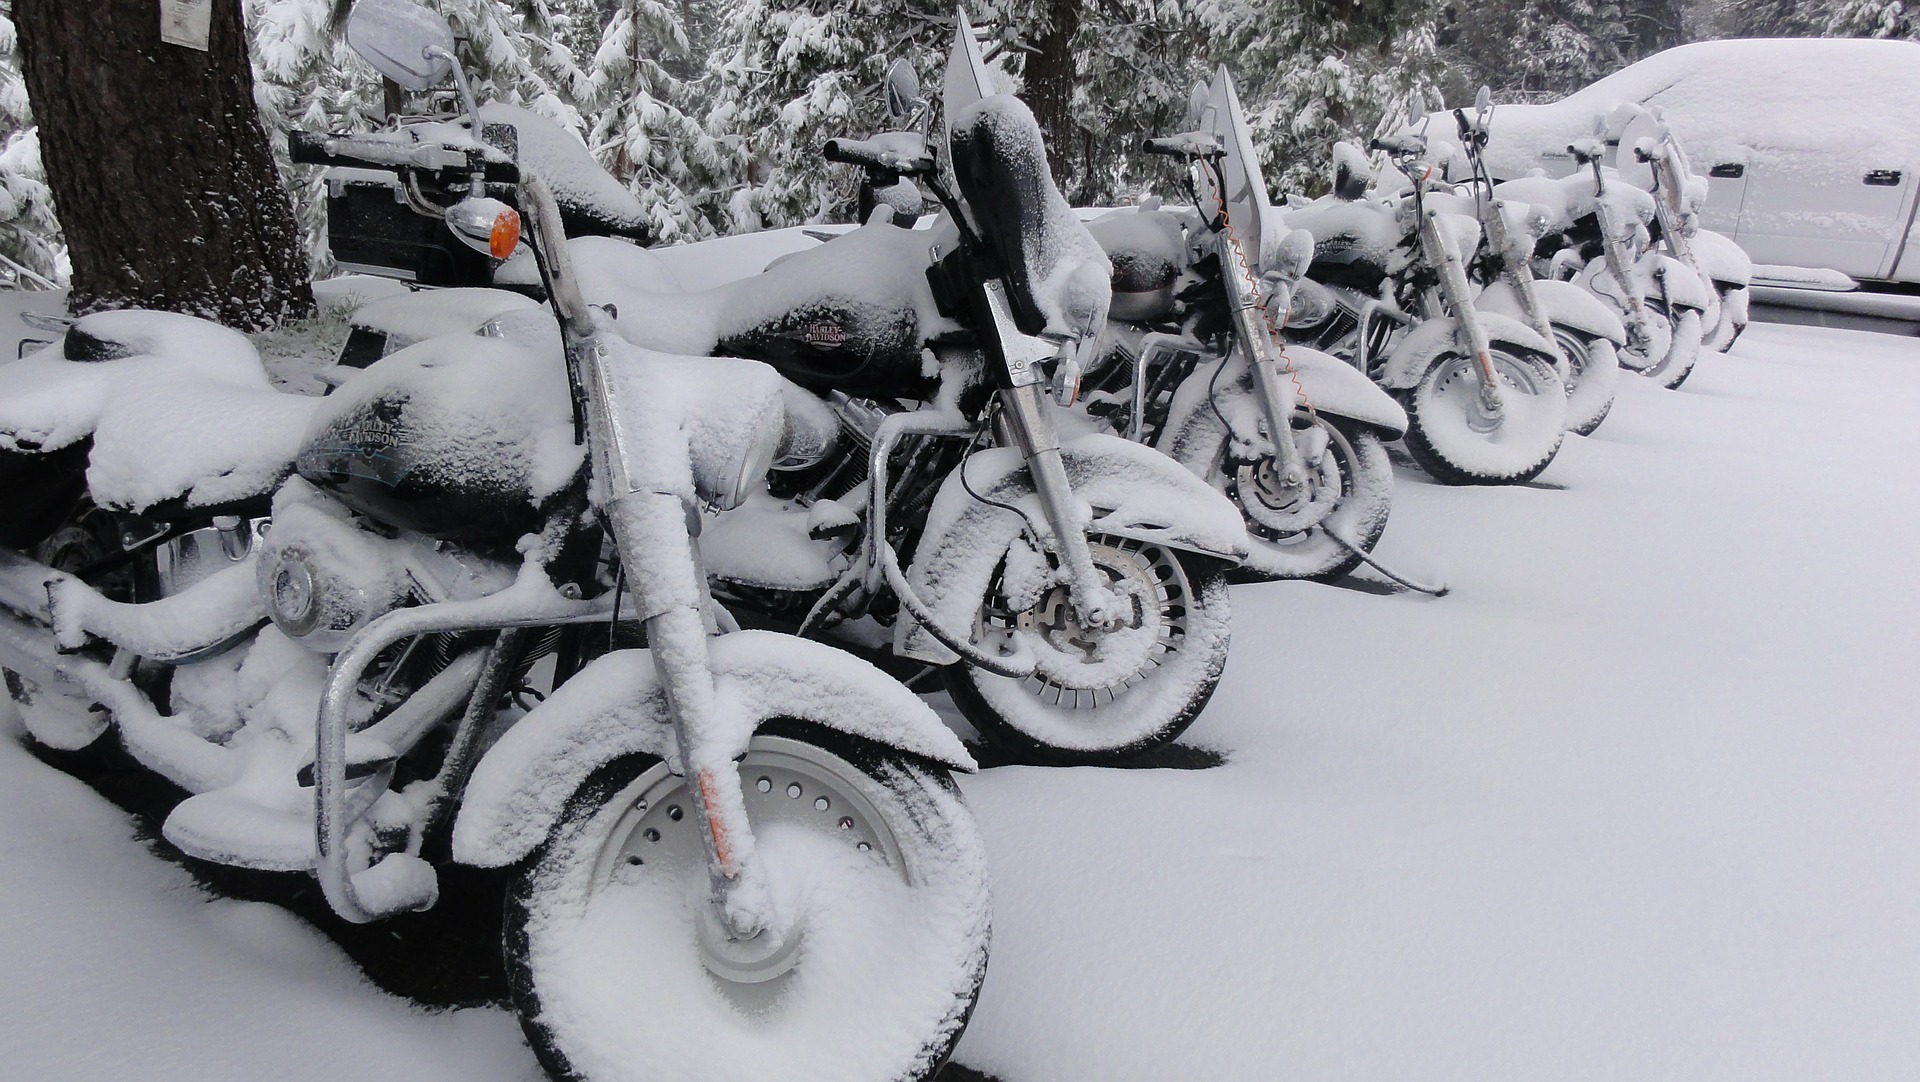 Motorcycles parked in snow winter